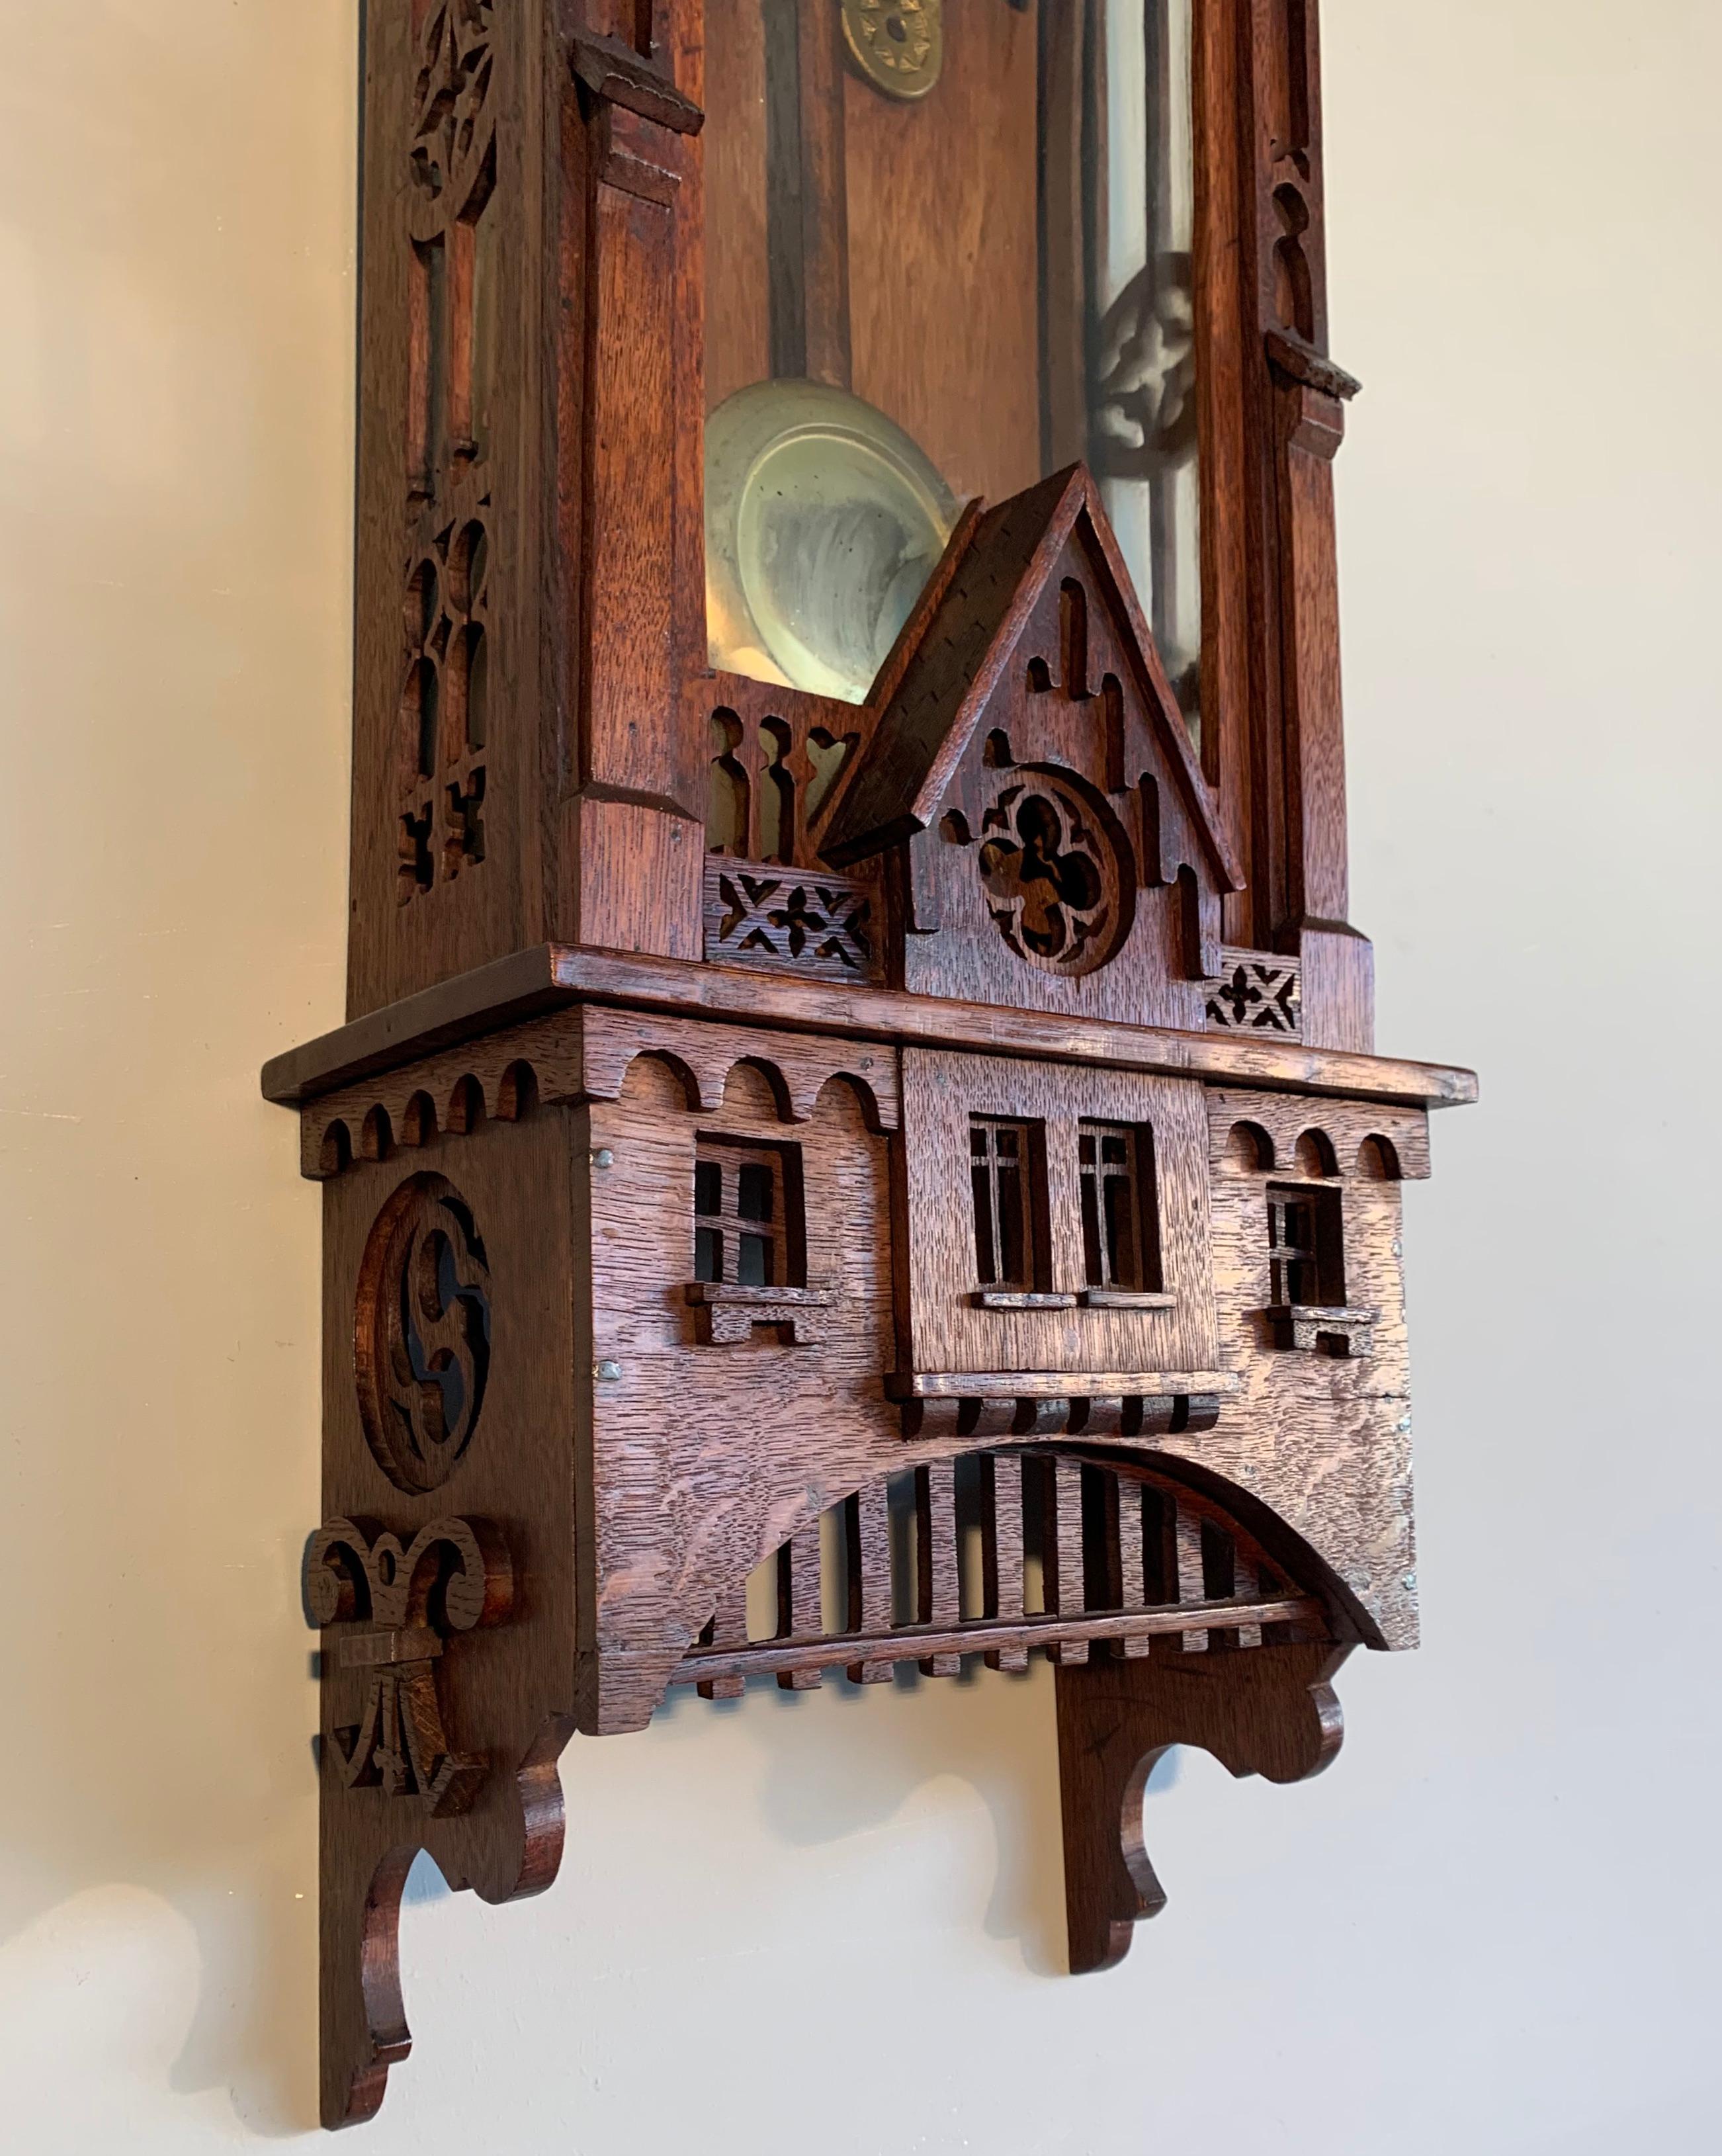 German Unique, Large and All Handcrafted Early 20th Century Gothic Revival Wall Clock